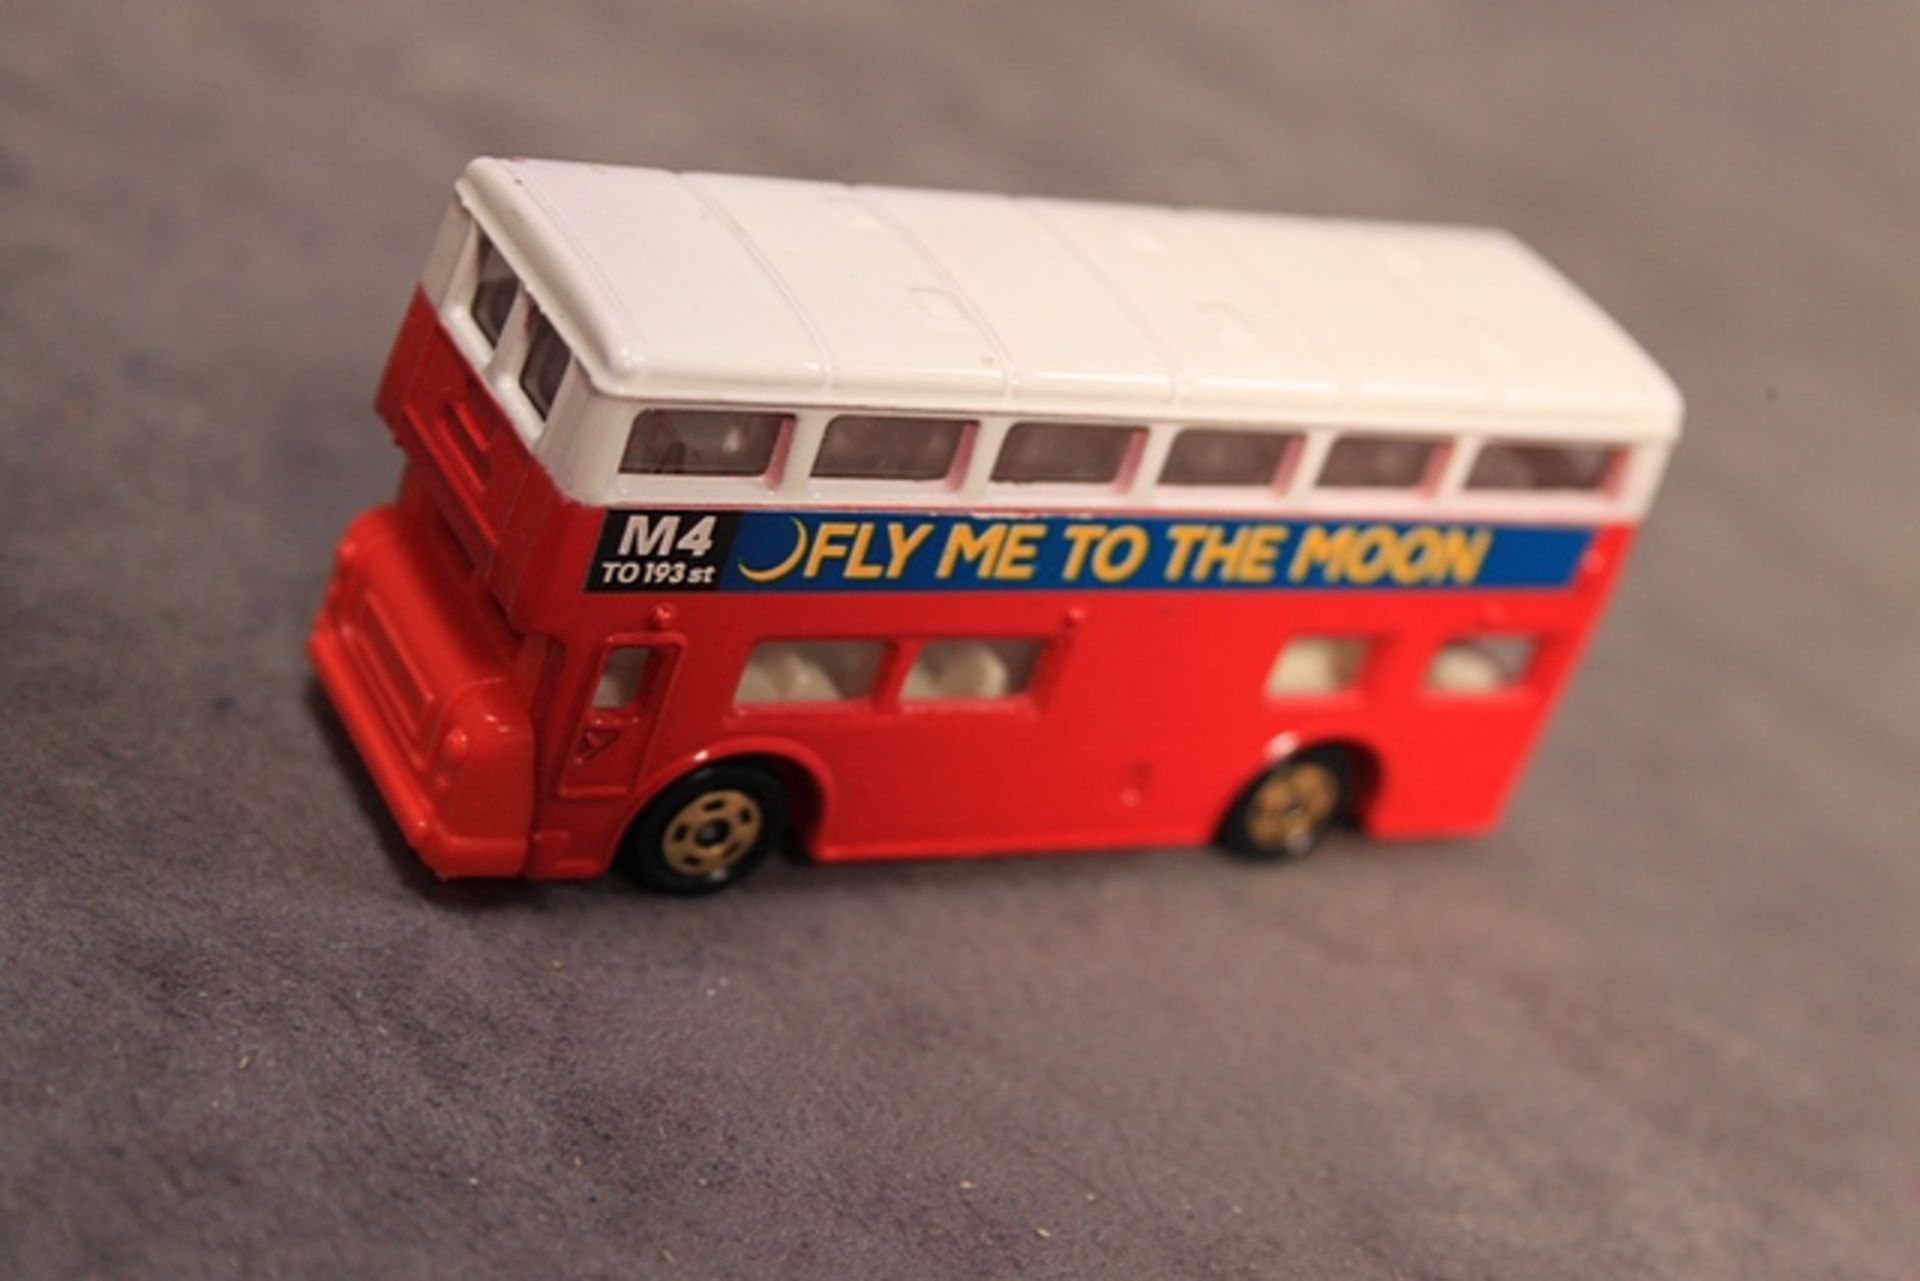 Mint Tomica diecast #F15 London Bus in Red & White with gold wheels (Fly me to the moon)with box - Image 3 of 3